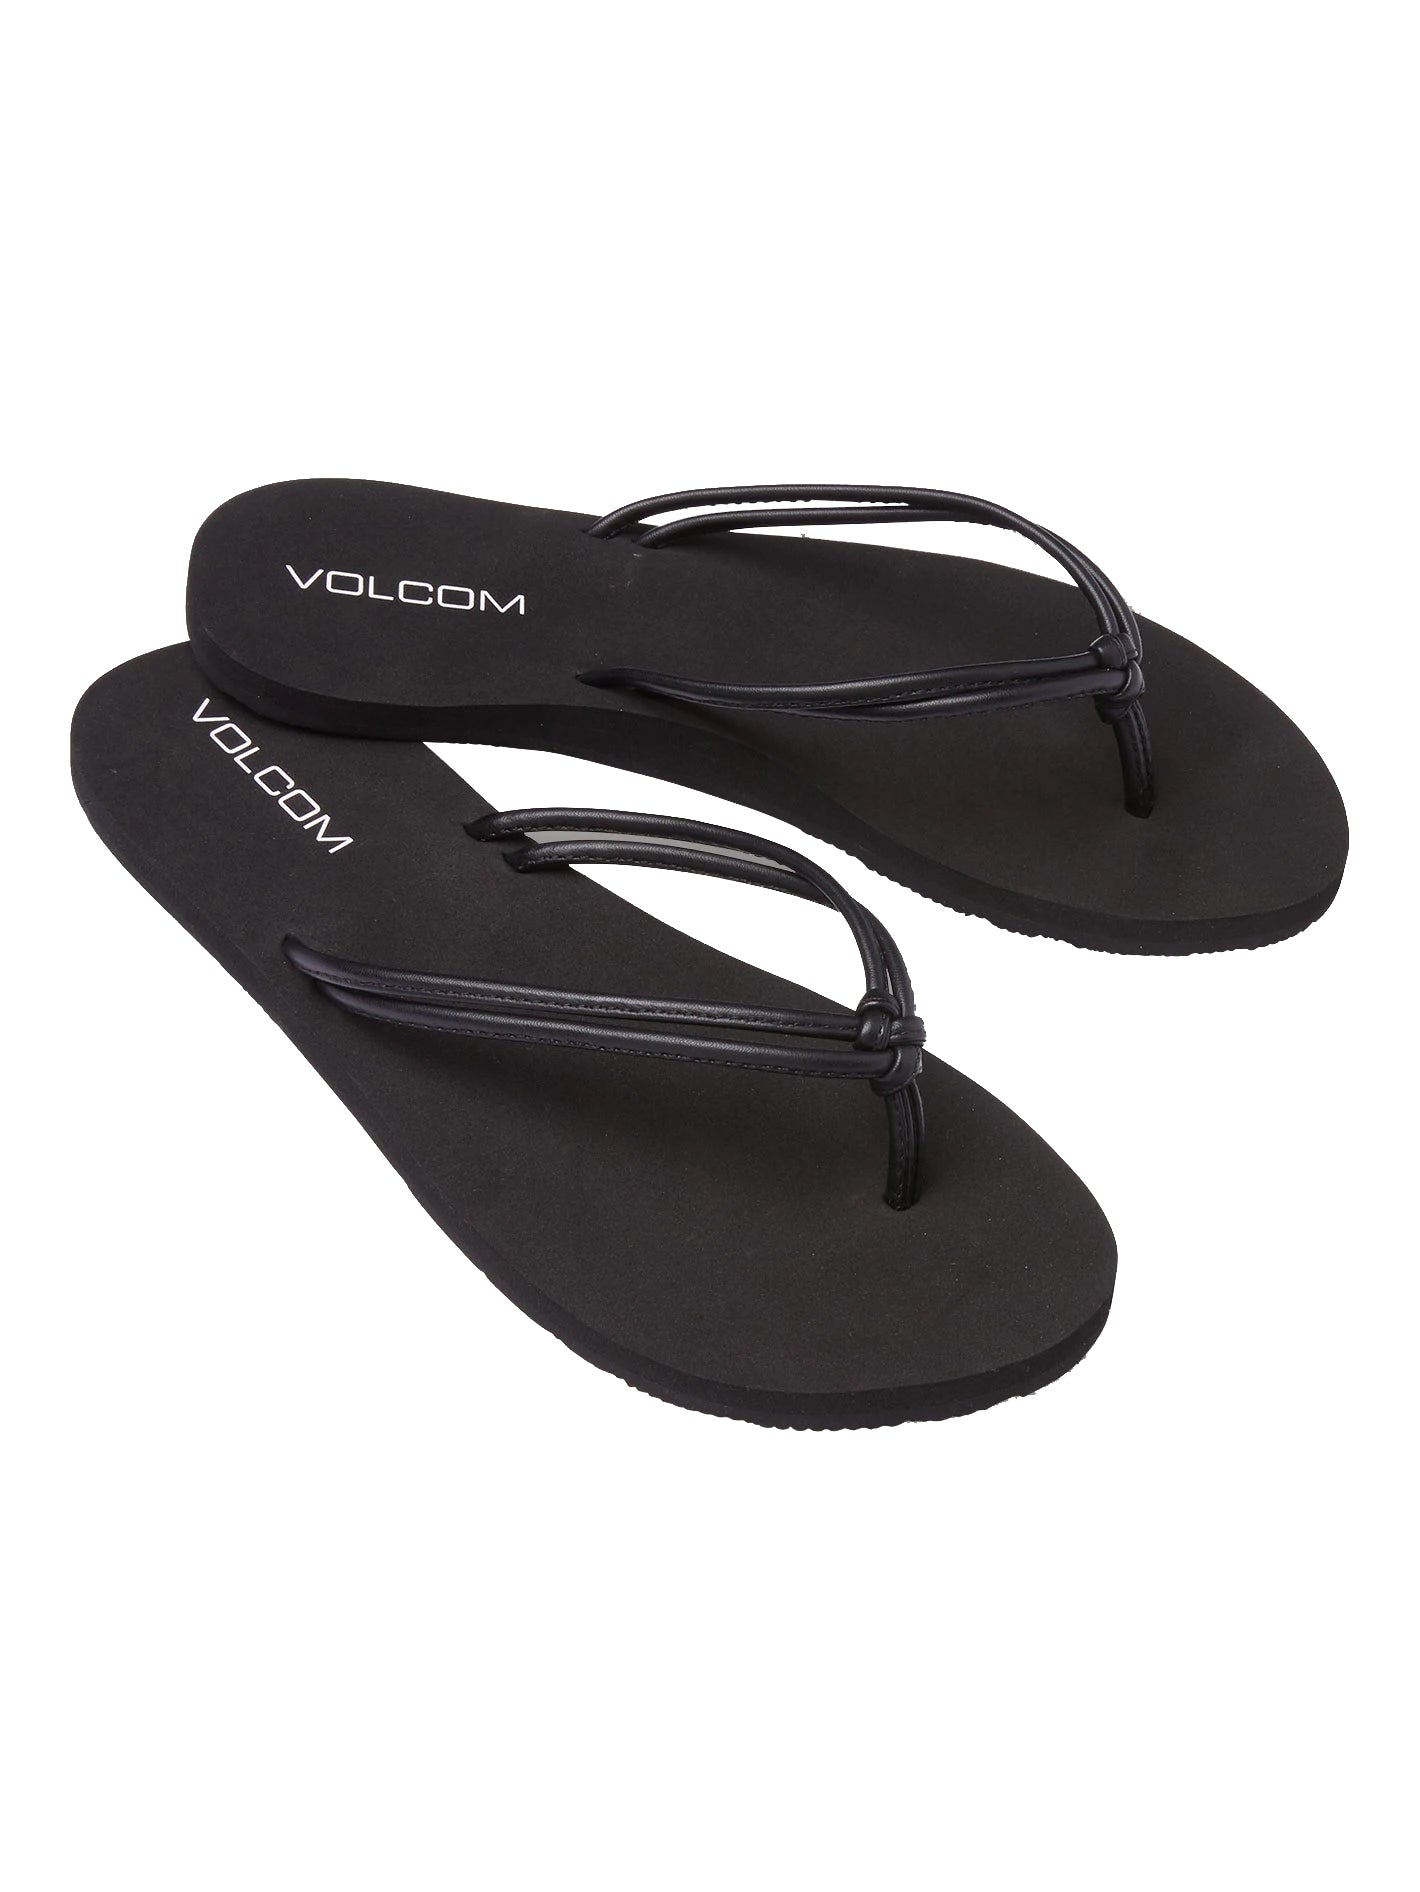 Volcom Forever and Ever 2 Womens Sandal BKO-Black Out 7